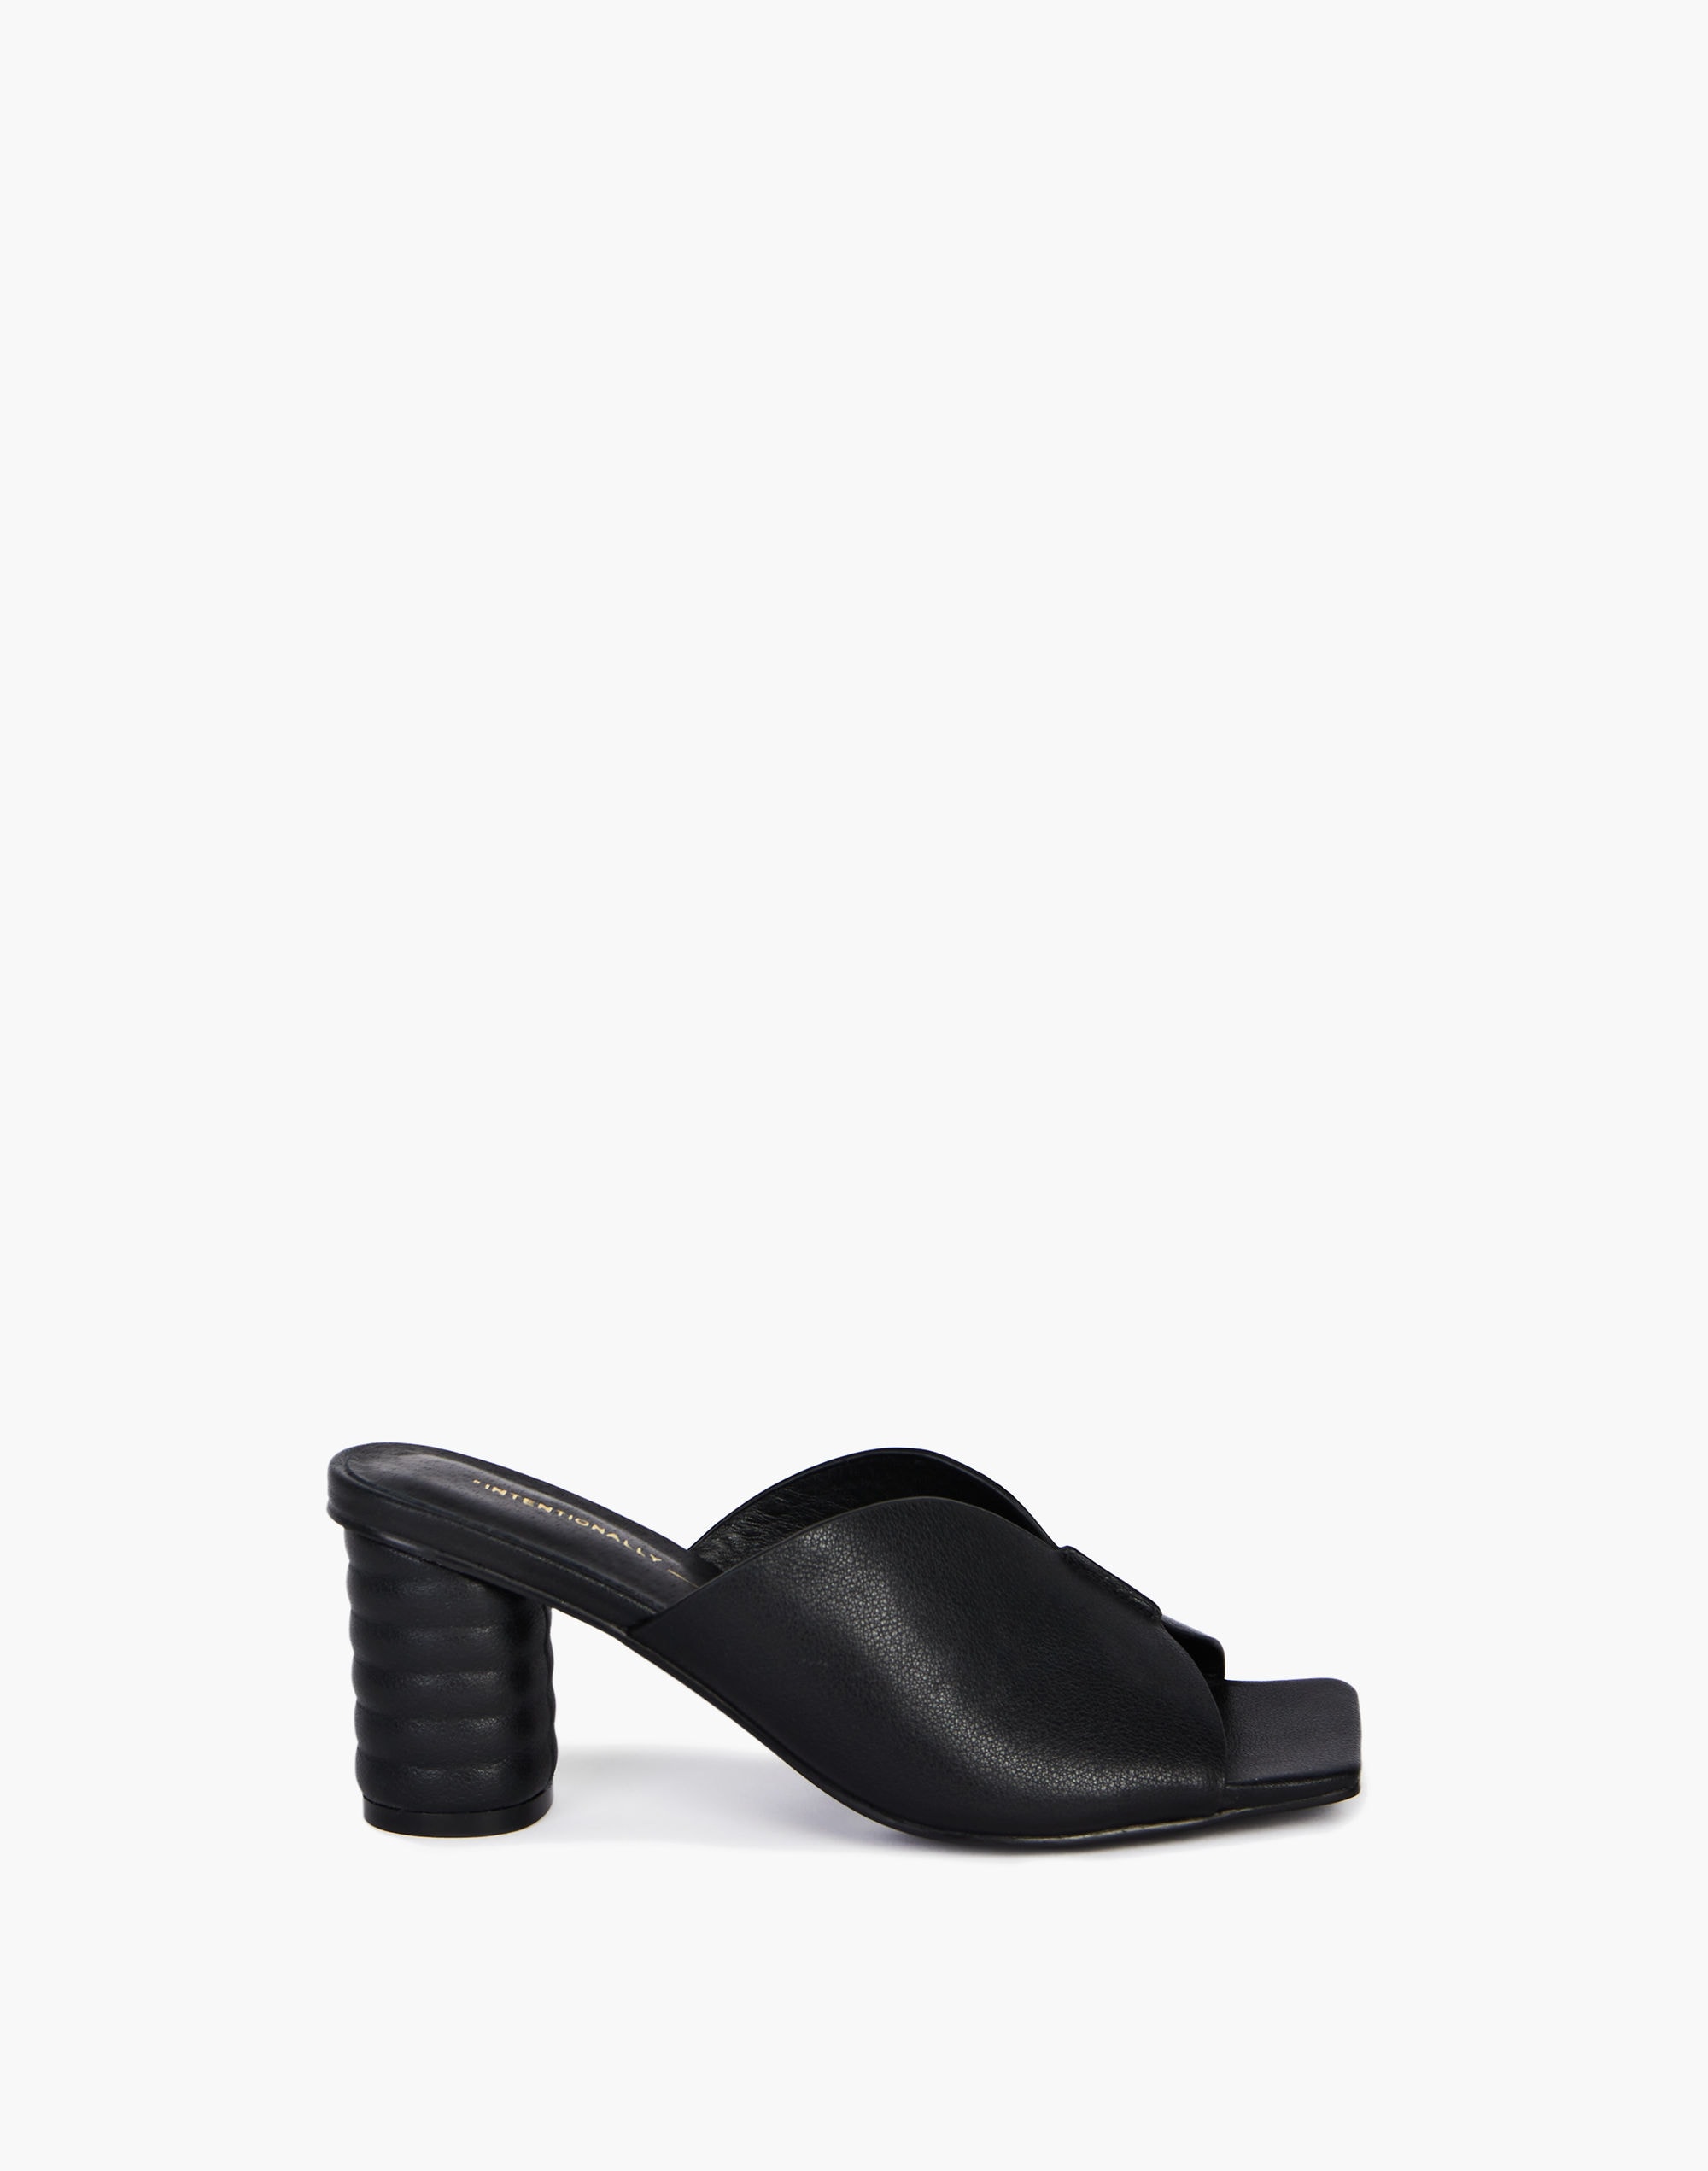 Intentionally Blank Leather Kamika Mules